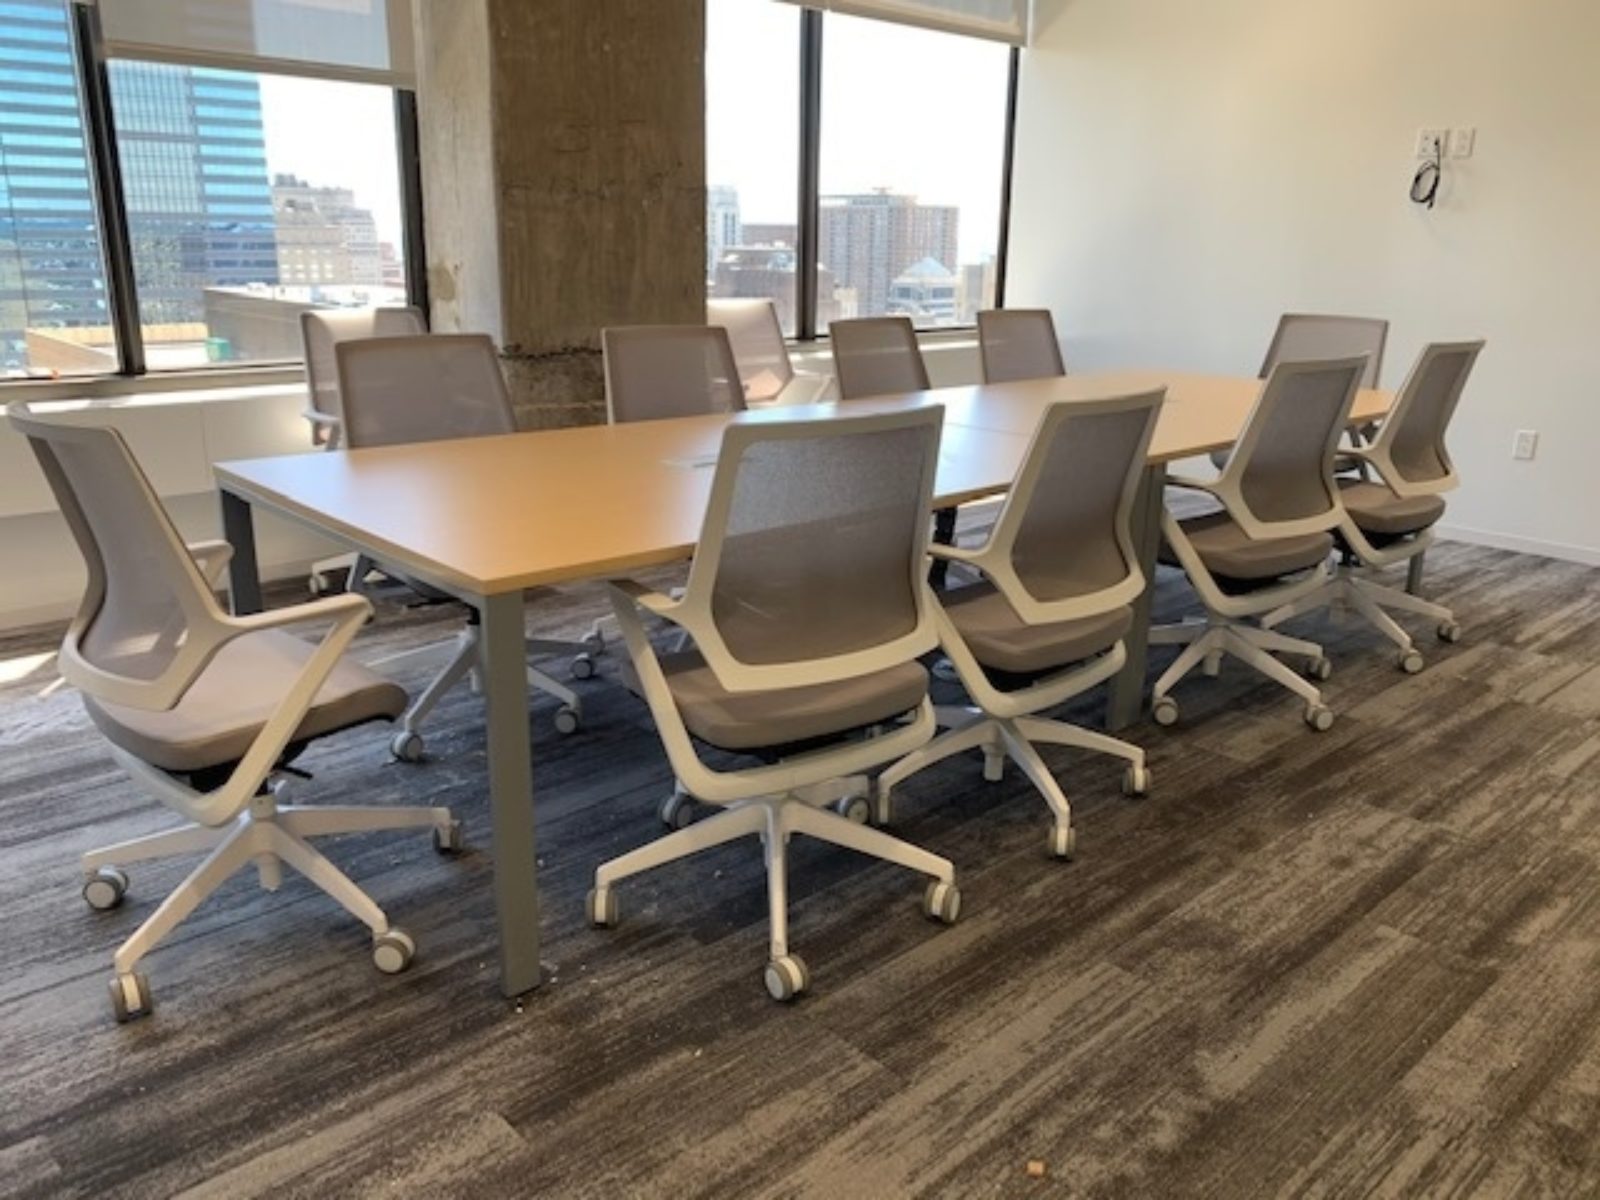 Conference room with woodgrain table top and silver legs. Conference chairs have grey mesh backs and grey seats with white frames.